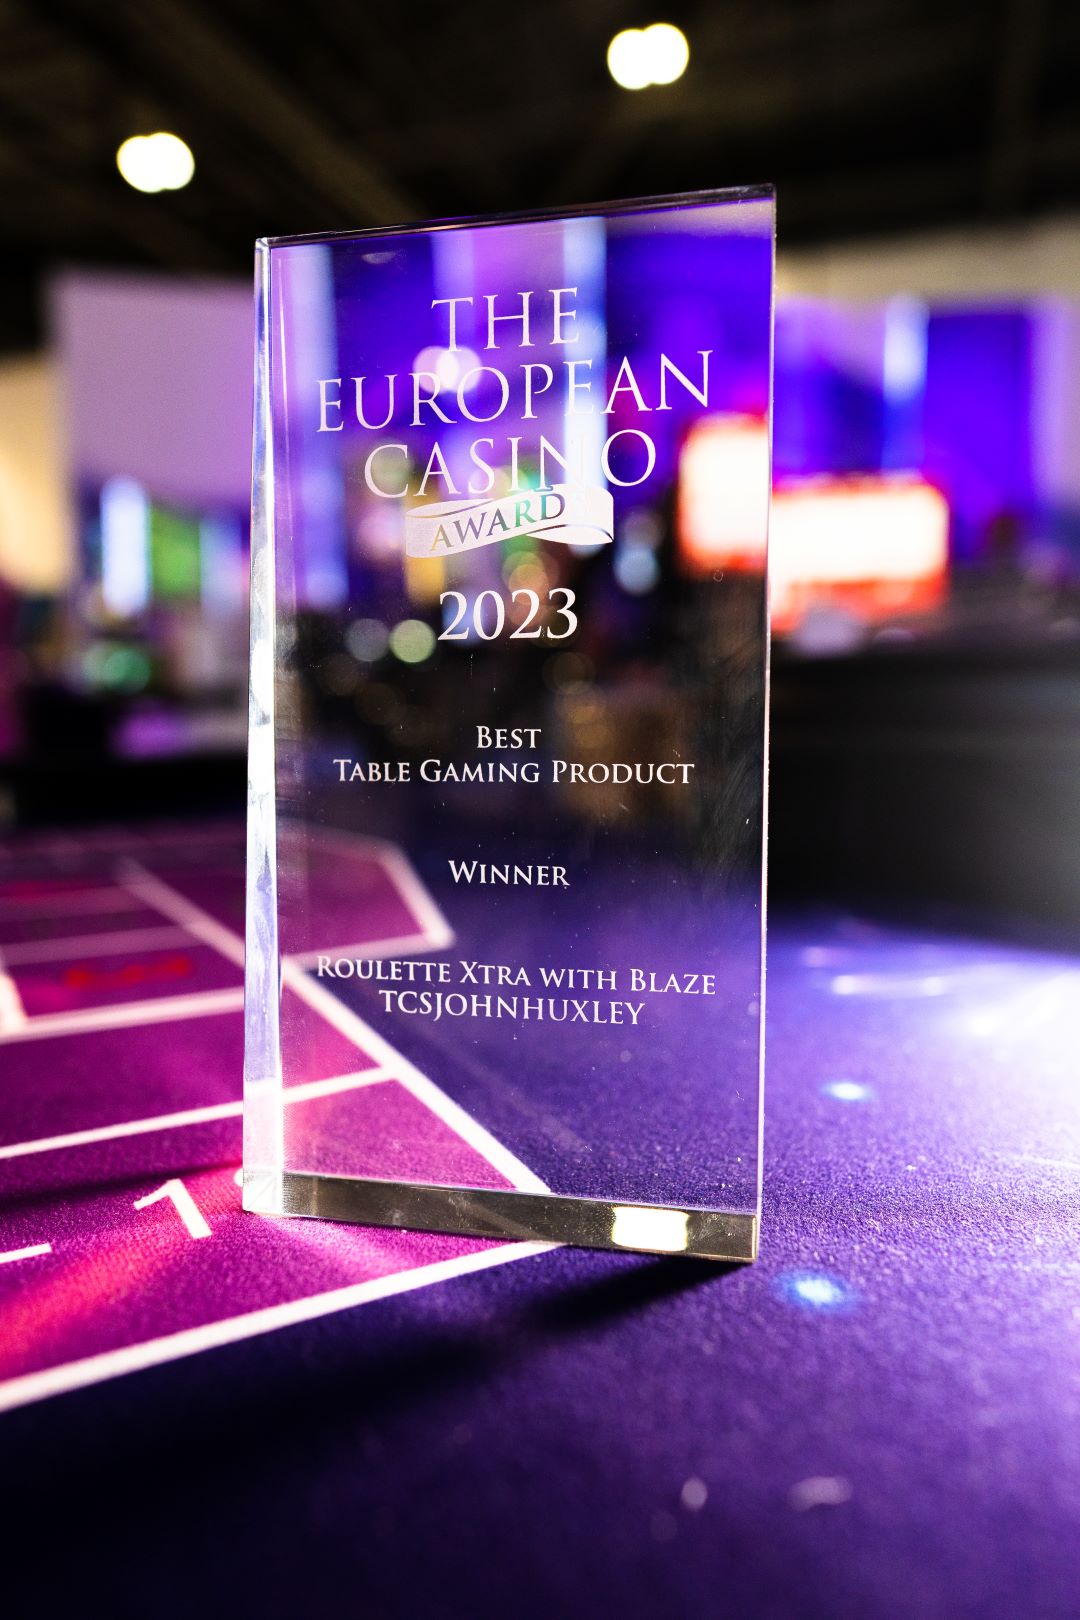 TCSJOHNHUXLEY wins Best Table Game Product at The European Casino Awards 2023